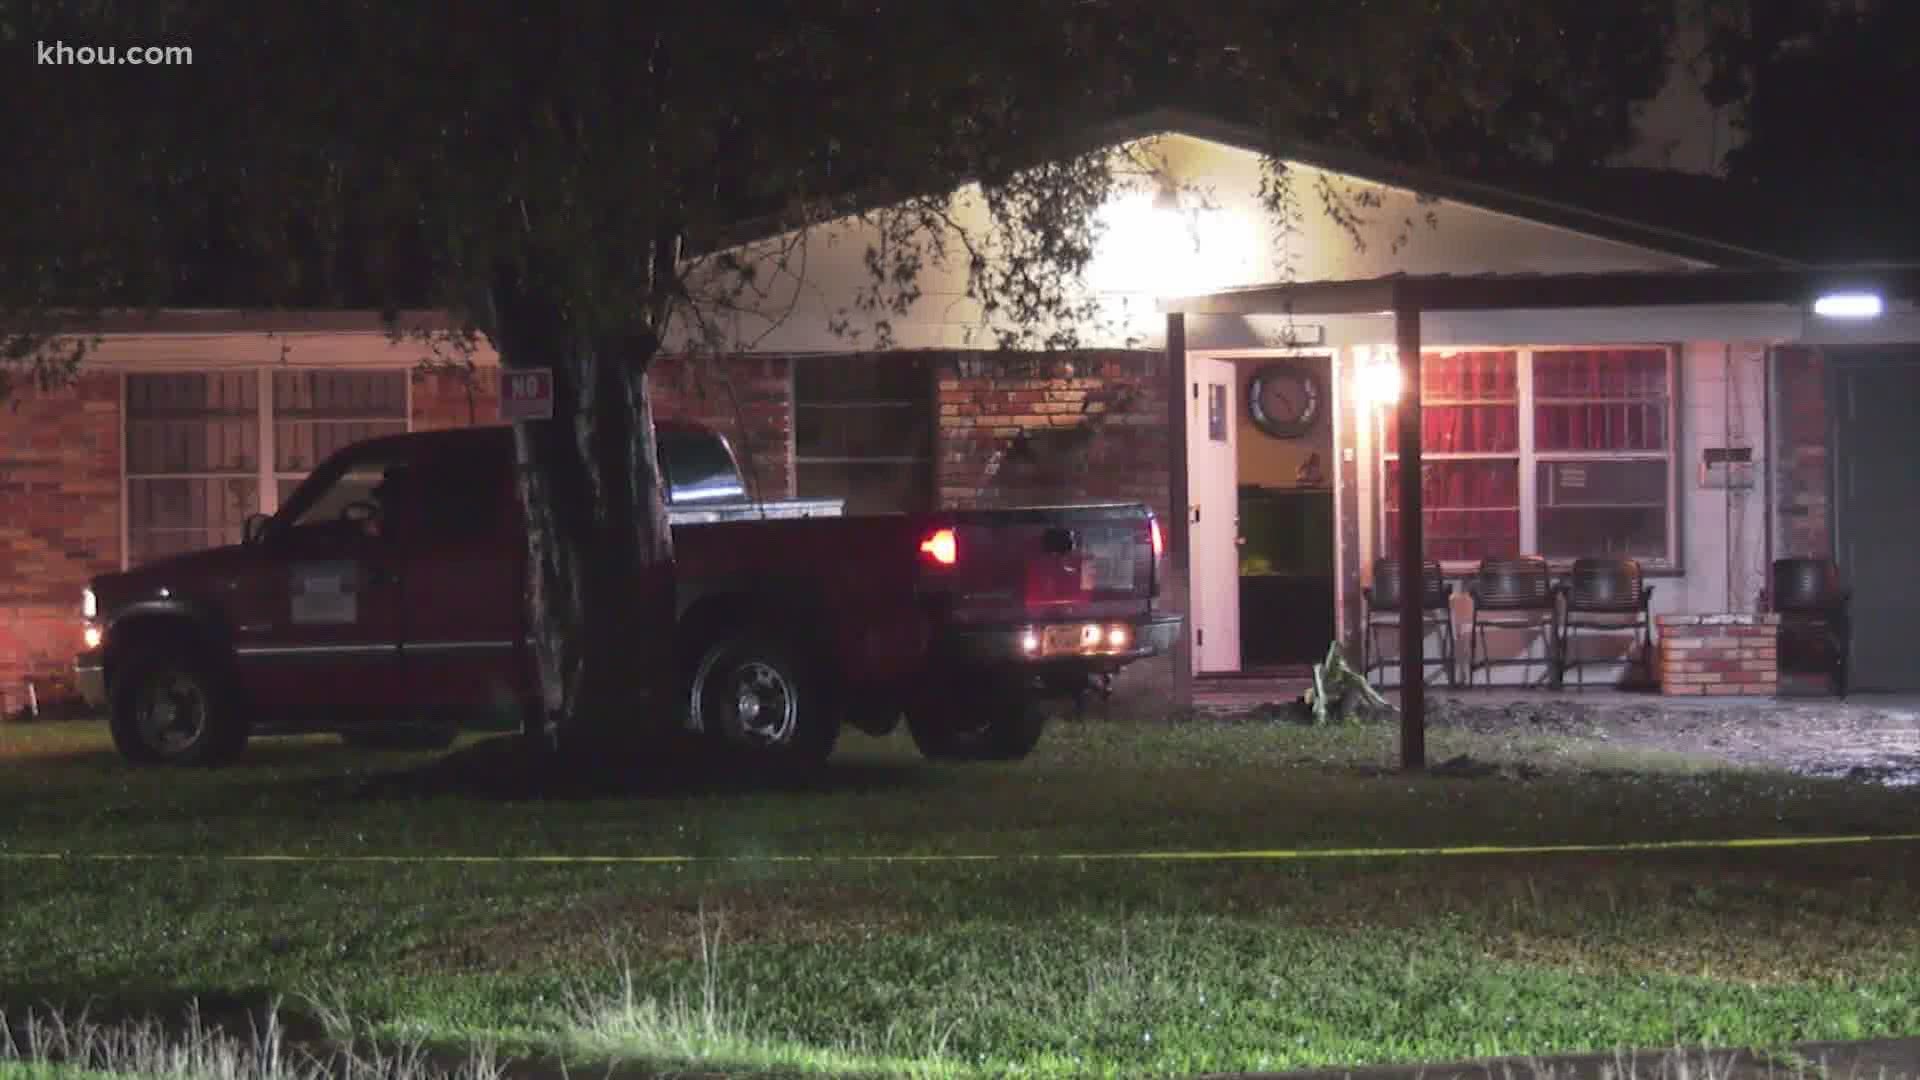 A father has been shot twice in two separate shootings by his daughter's ex-boyfriend, according to Houston police.